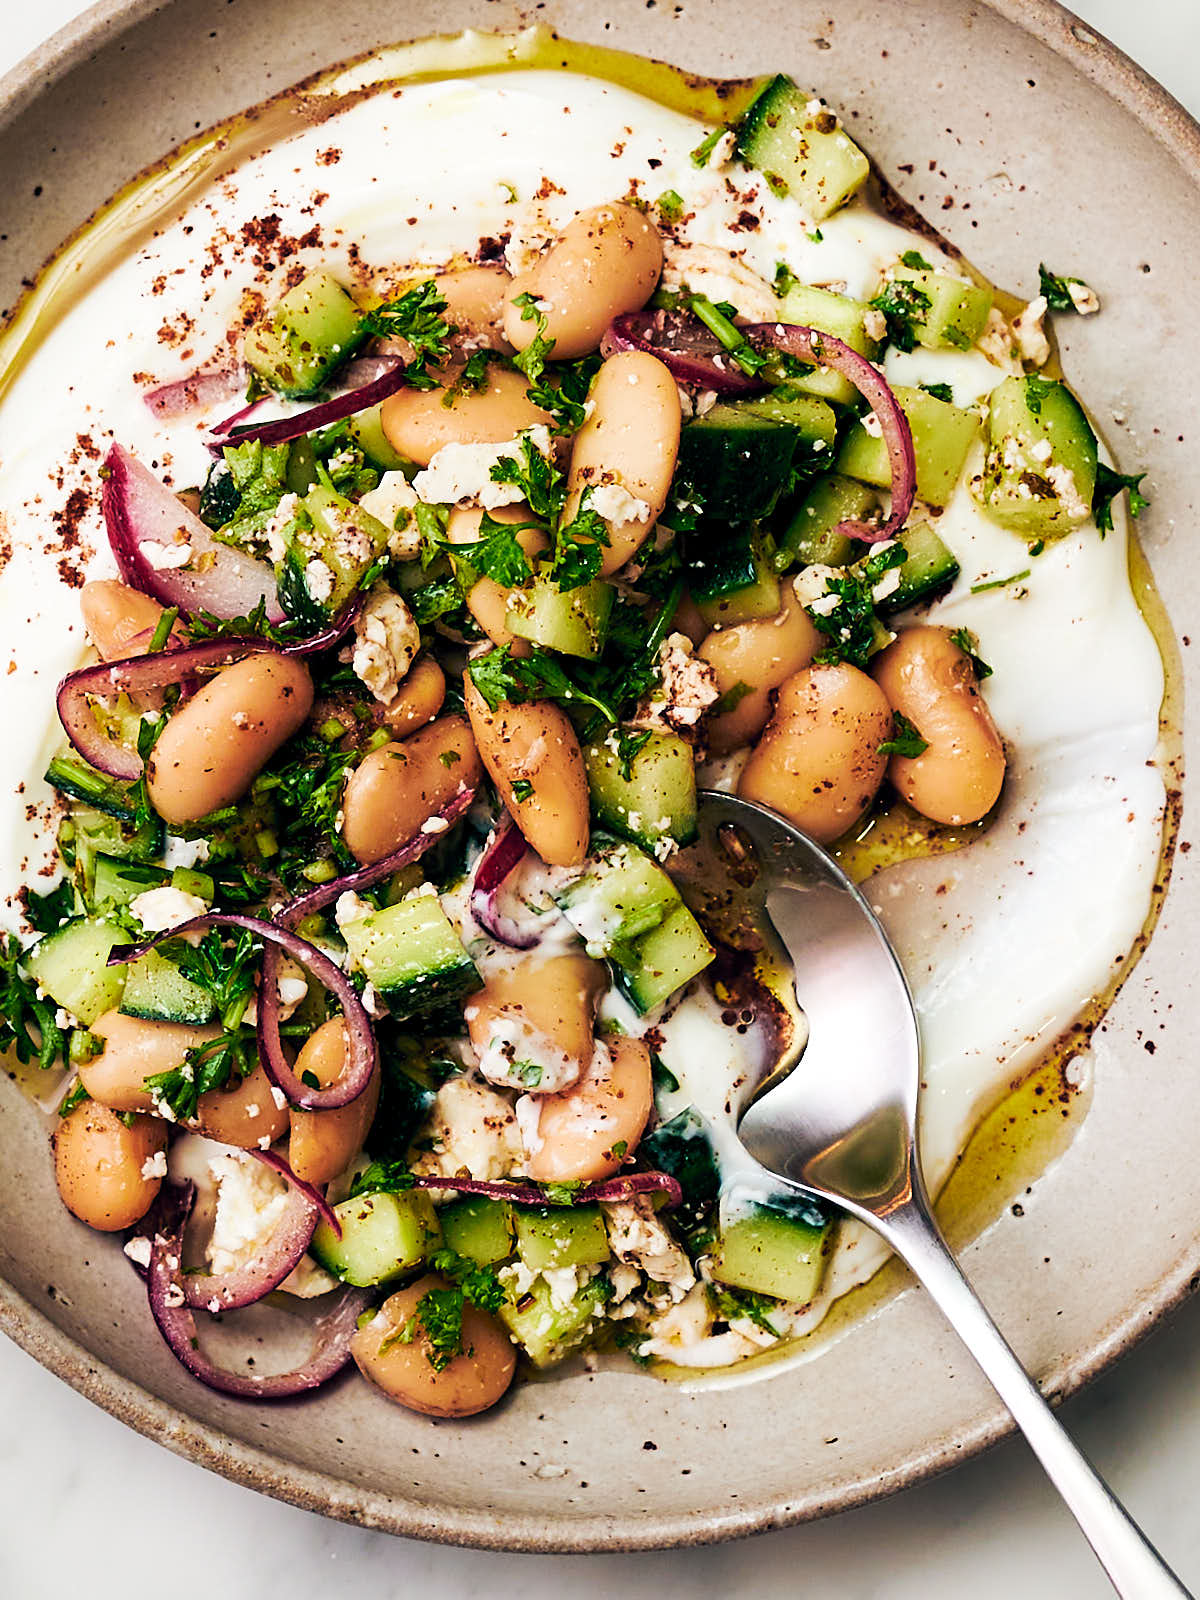 Butter bean salad with feta and cucumber and sumac onions on a plate with a spoon.